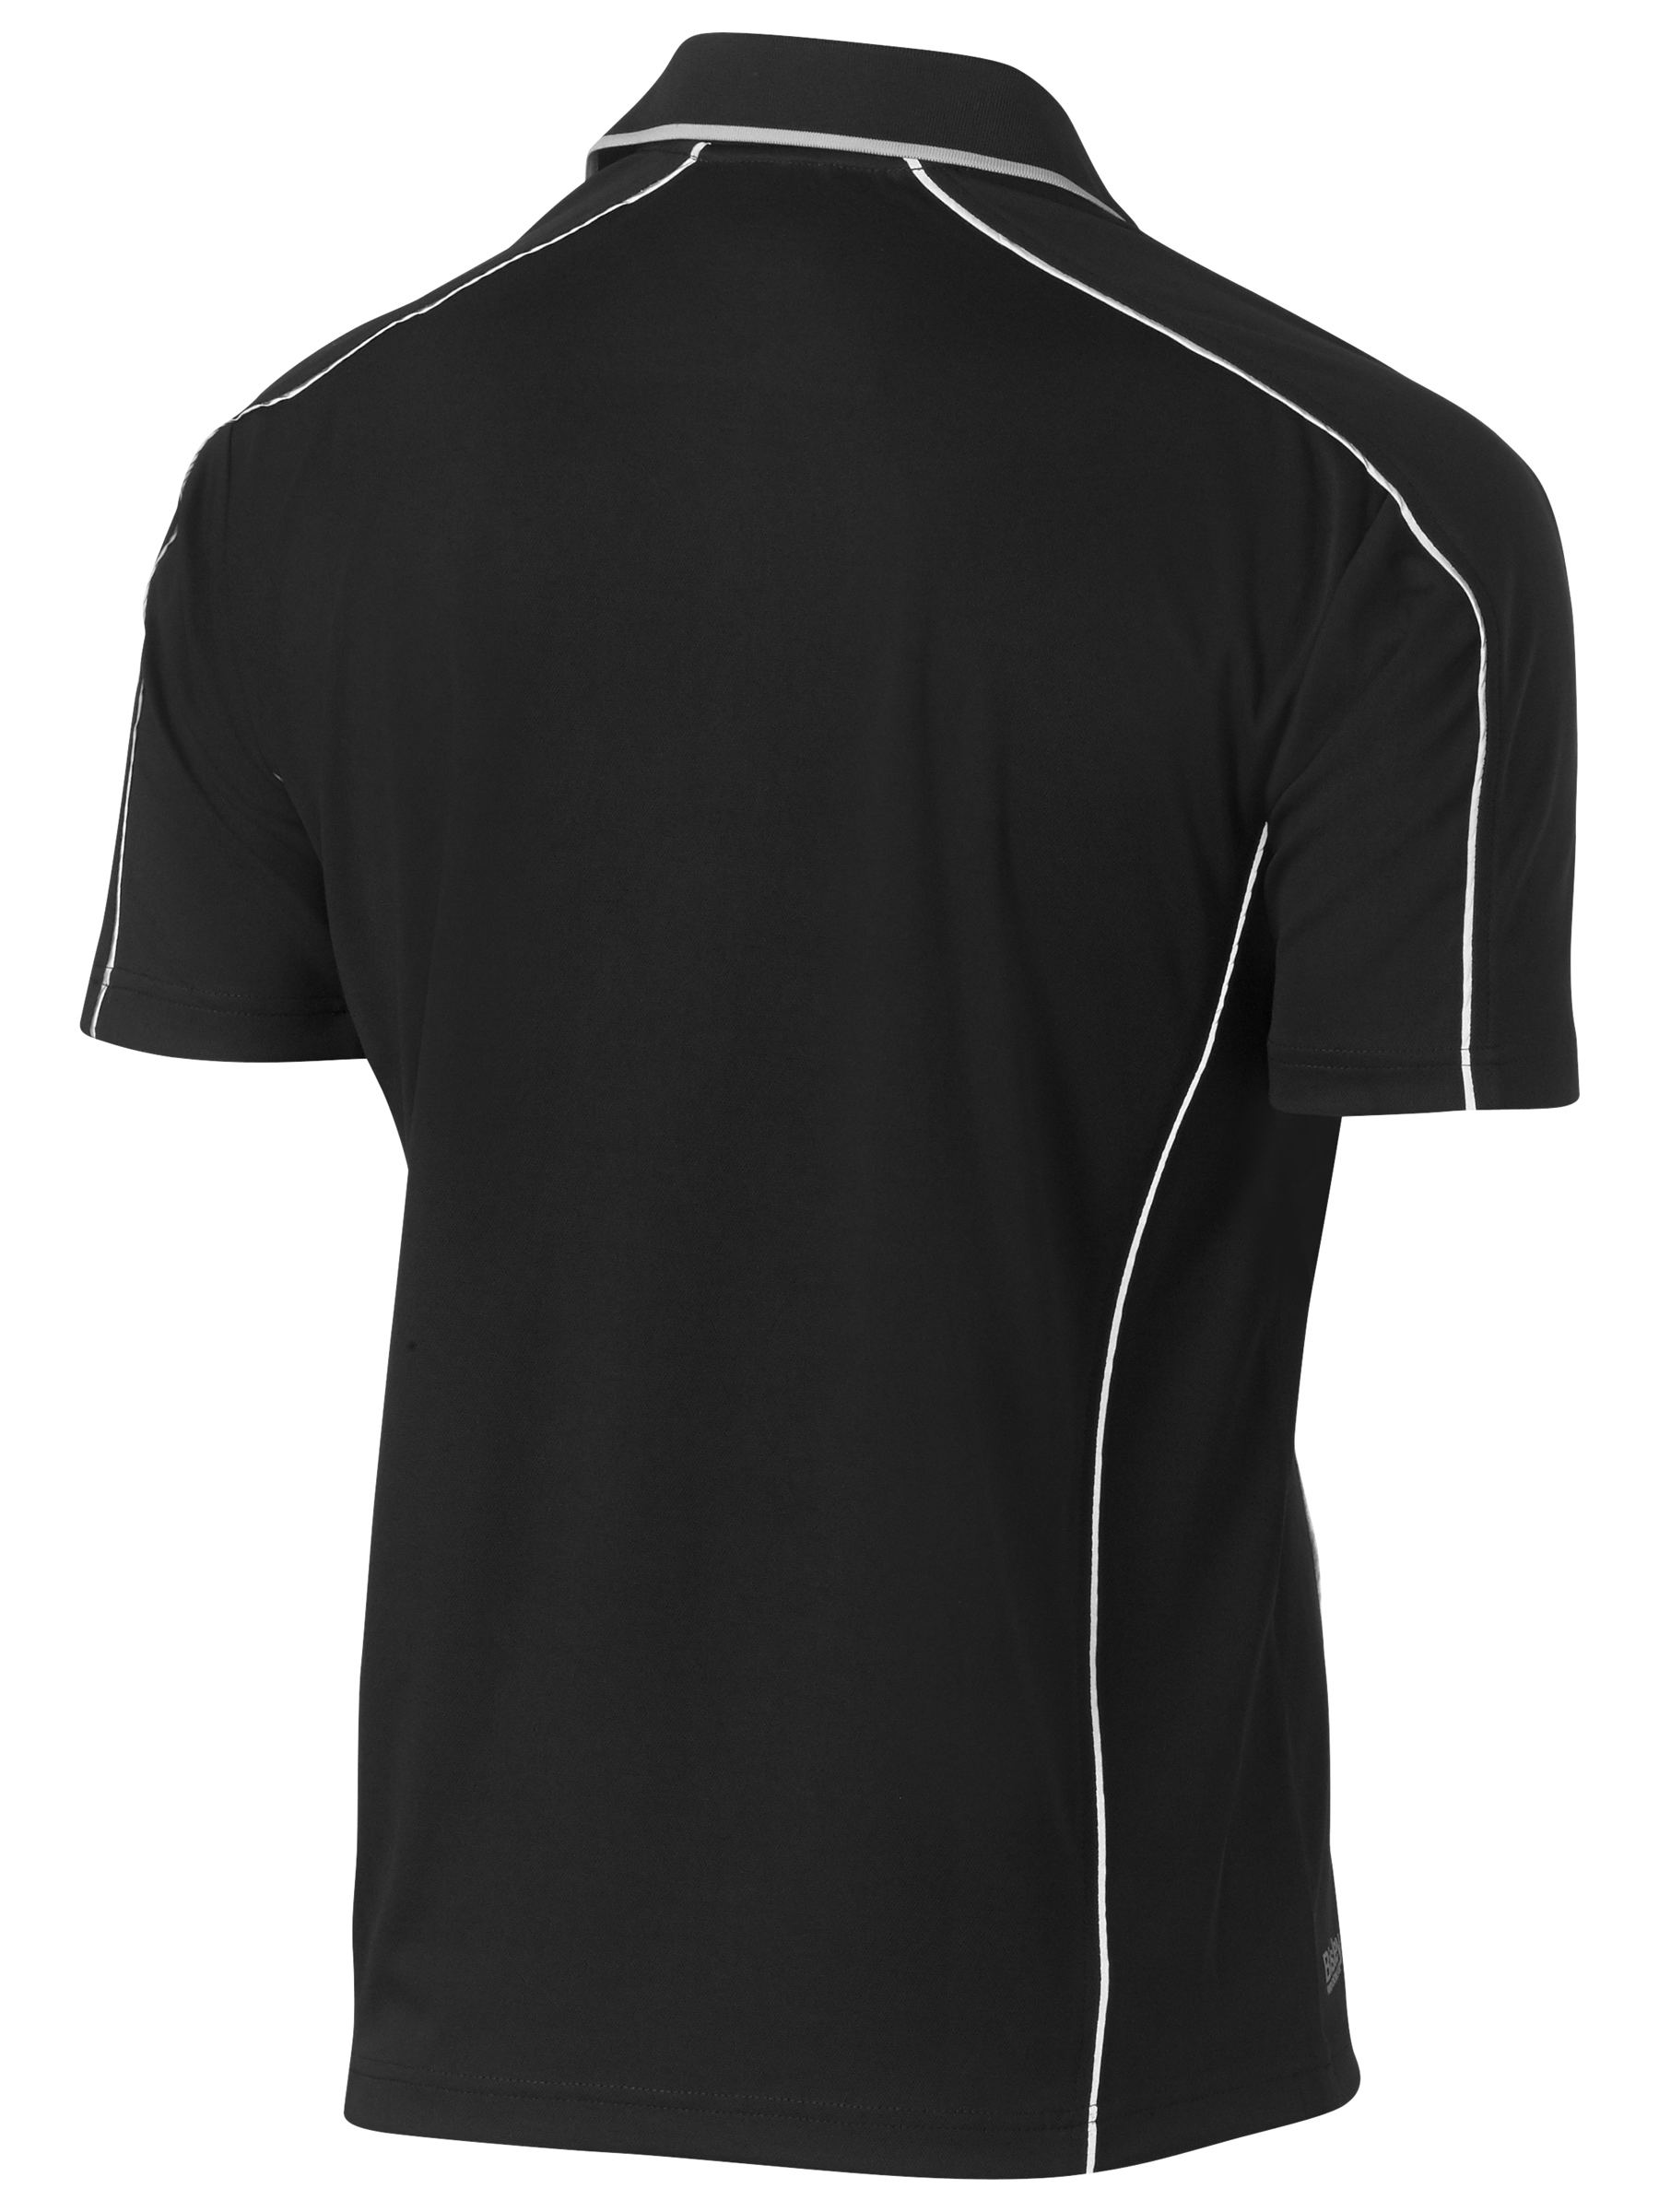 Cool Mesh Polo Shirt With Reflective Piping - BK1425 - Bisley Workwear